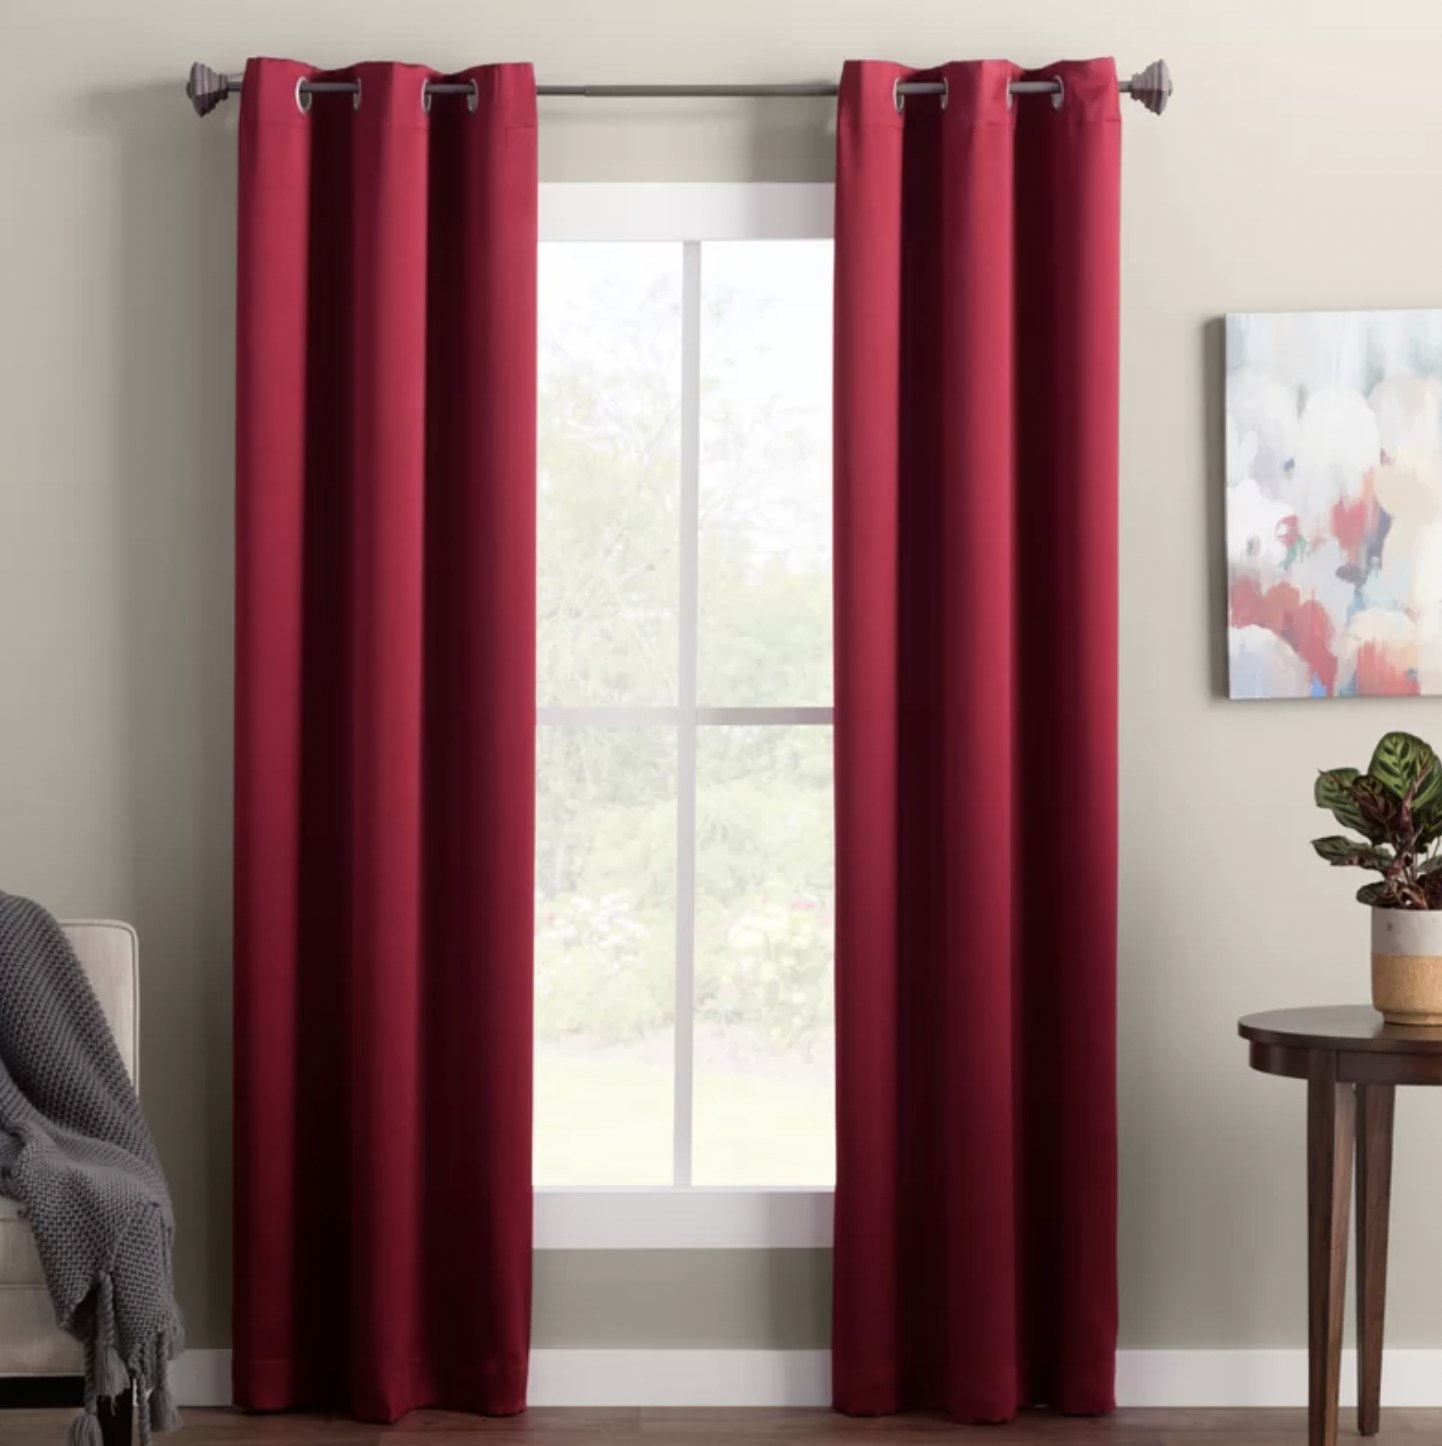 the red curtain panels framing window